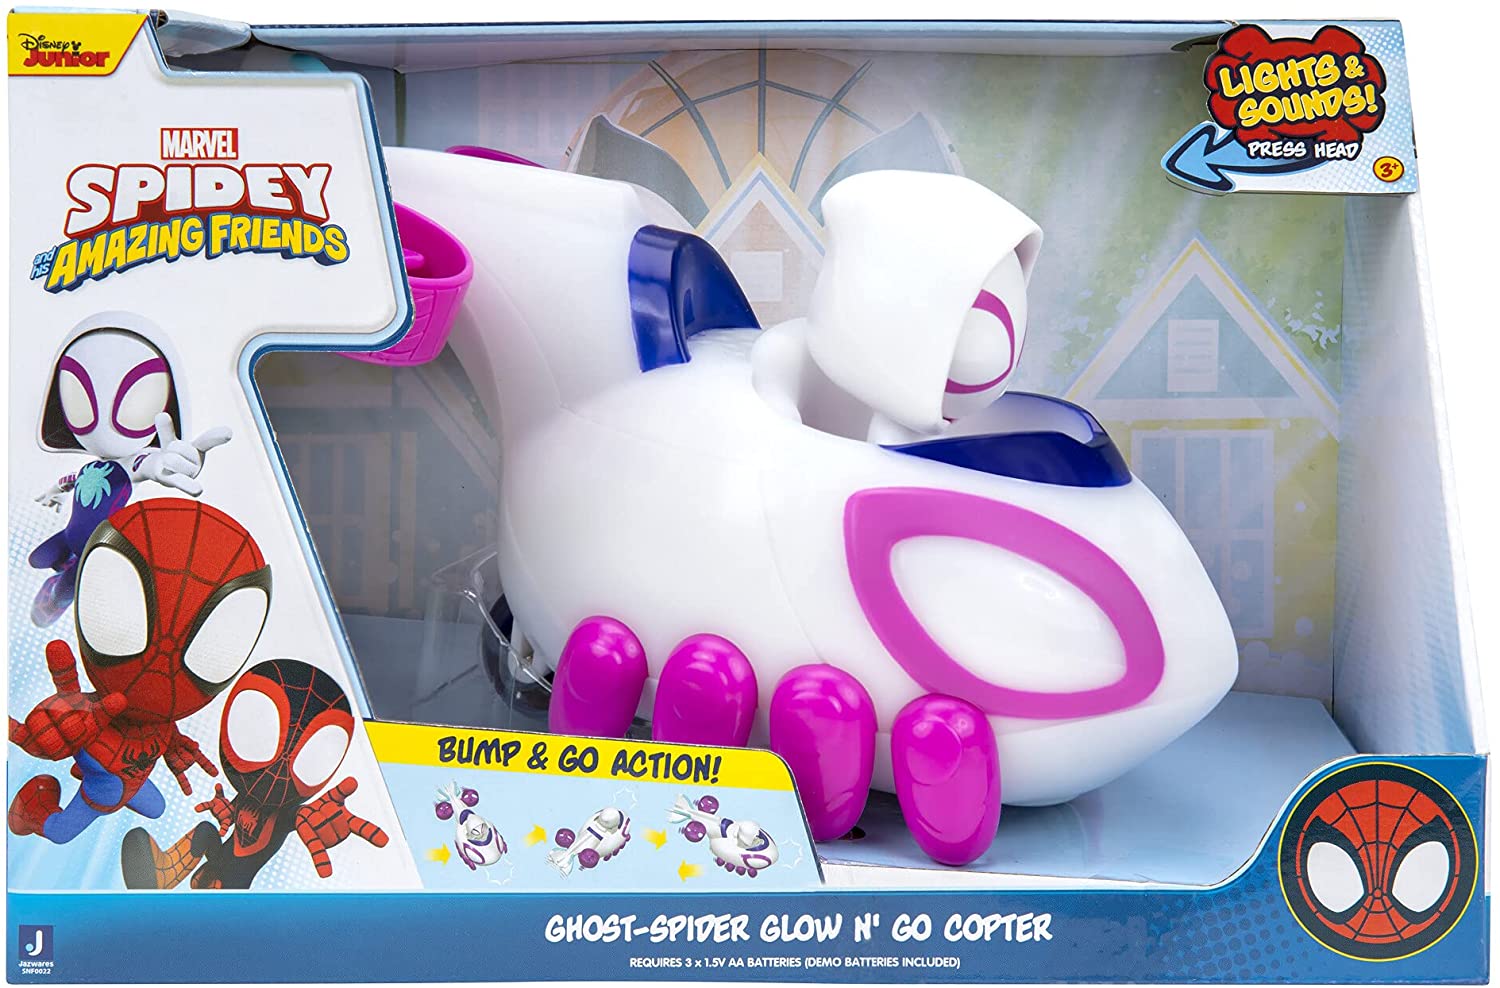 ghost-spider-glow-n-go-copter